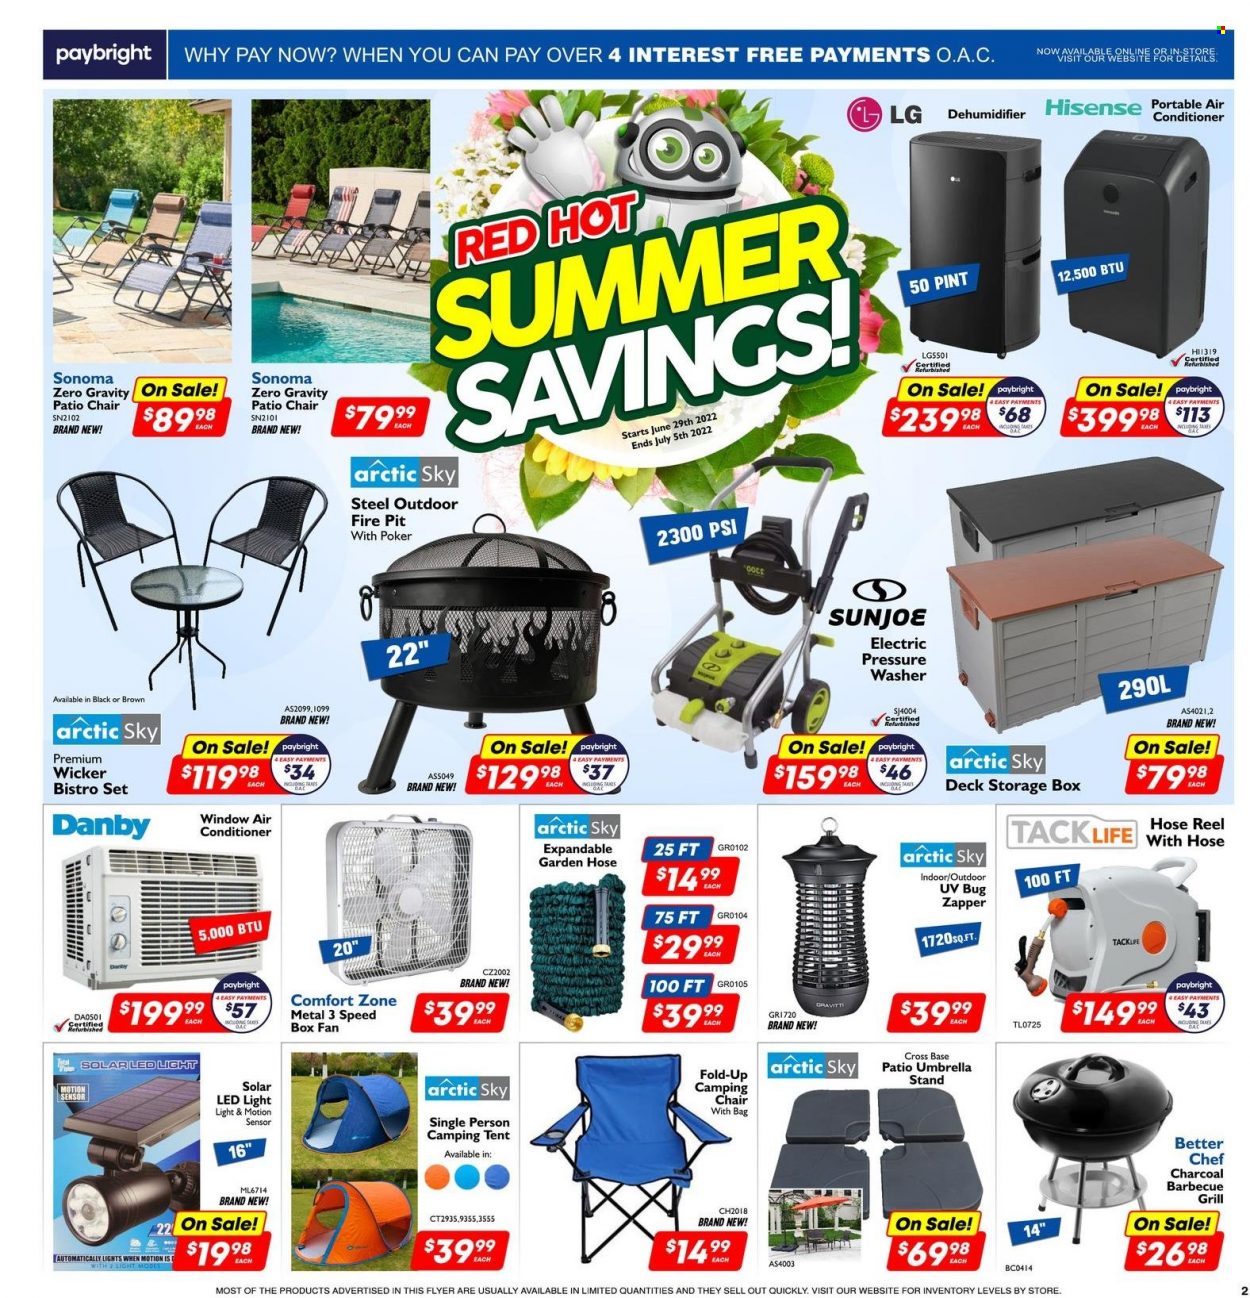 thumbnail - Factory Direct Flyer - June 29, 2022 - July 05, 2022 - Sales products - chair, cake, bag, motion sensor, Hisense, Danby, air conditioner, portable air conditioner, wall fan, storage box, LED light, solar led, grill, fire bowl, hose reel, garden hose, tent, camping chair, camping tent, LG. Page 2.